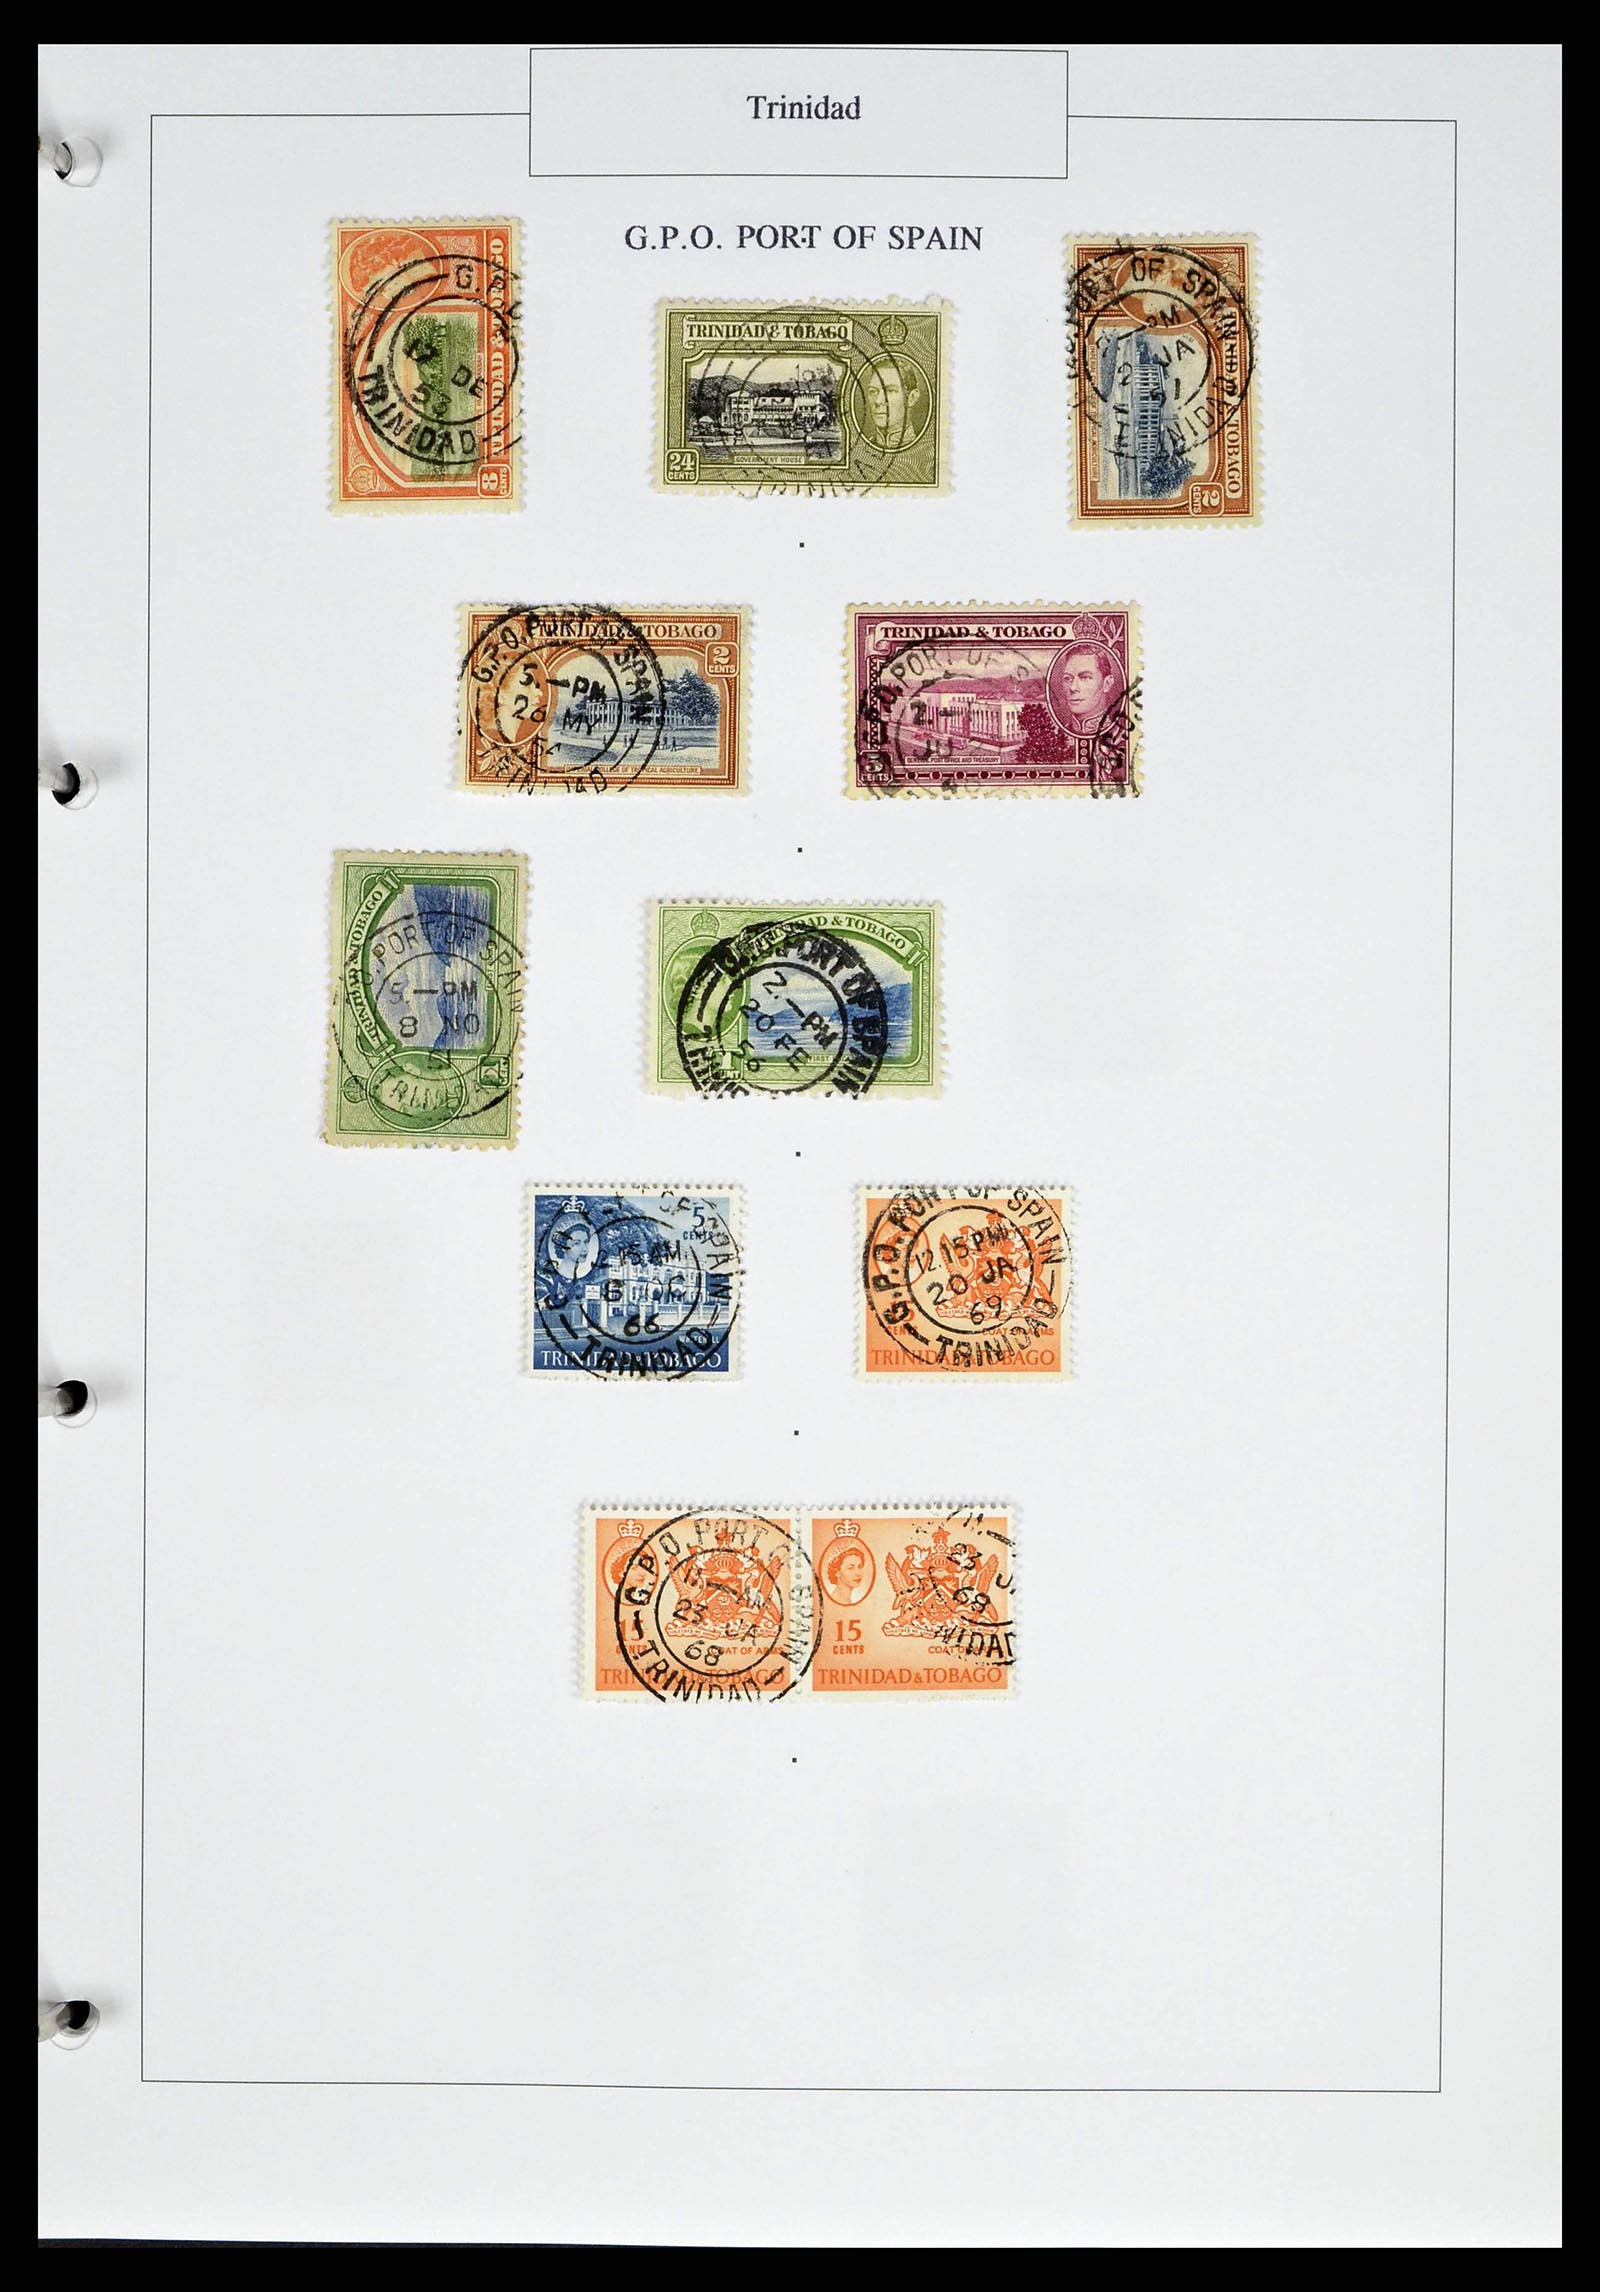 38481 0014 - Stamp collection 38481 Trinidad and Tobago cancels 1859-1960.